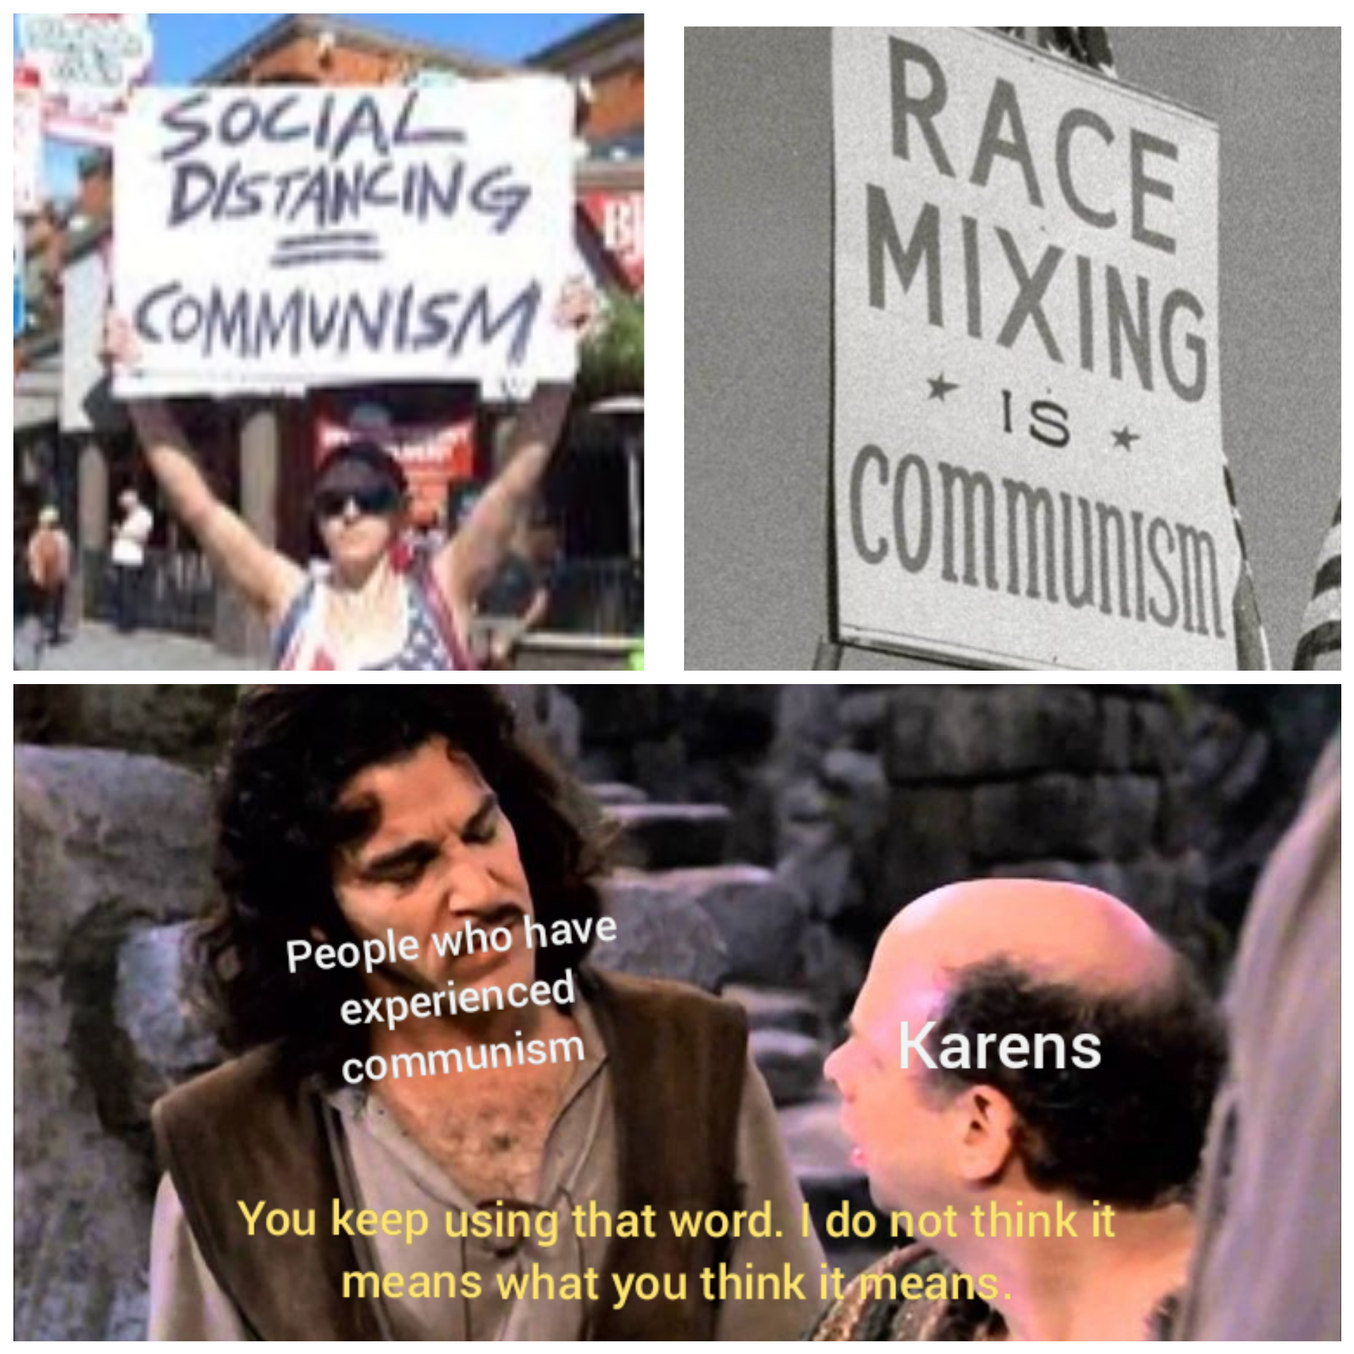 If we were under communism, you wouldn't be able to protest social distancing ye bastards - meme